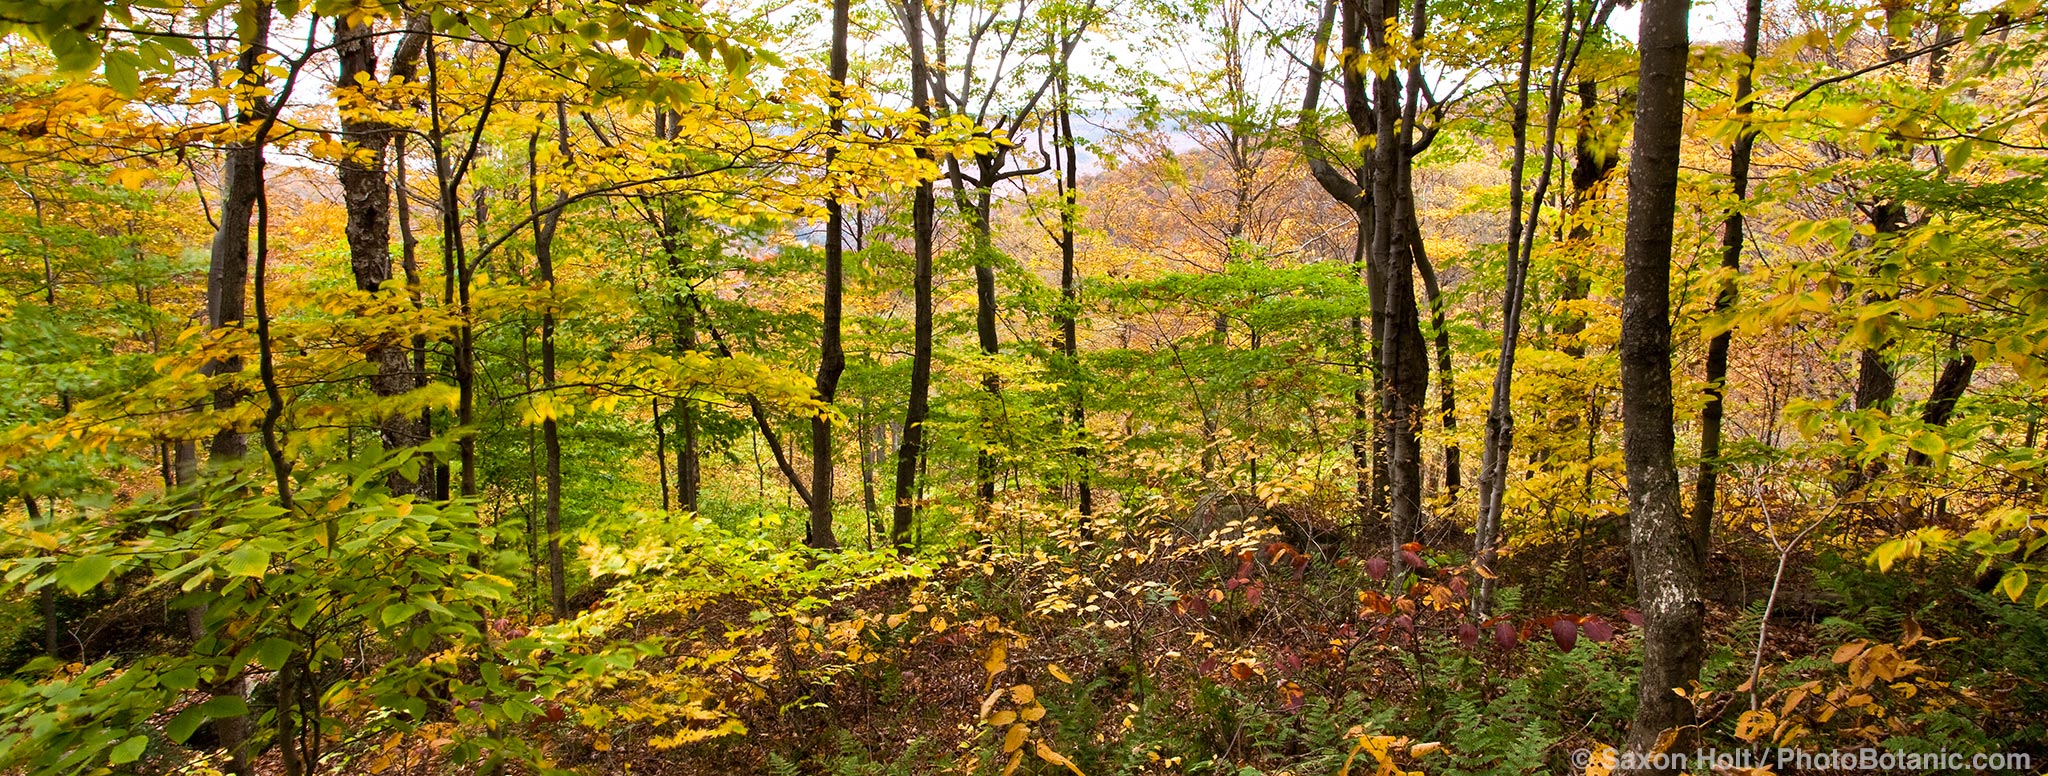 New England woodland in autumn